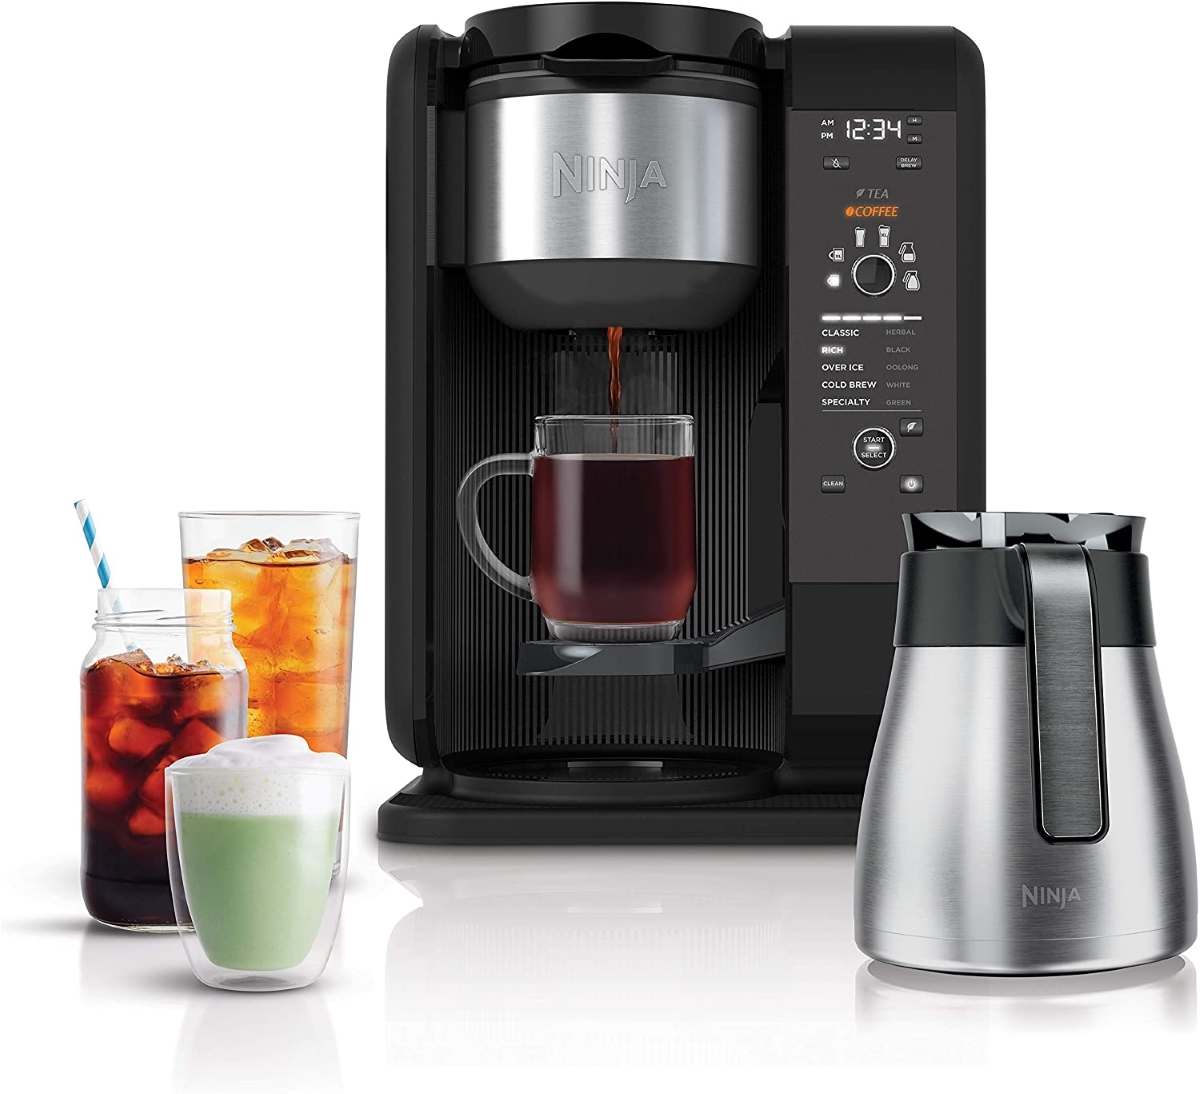 types of coffee makers - black coffee maker with iced drinks